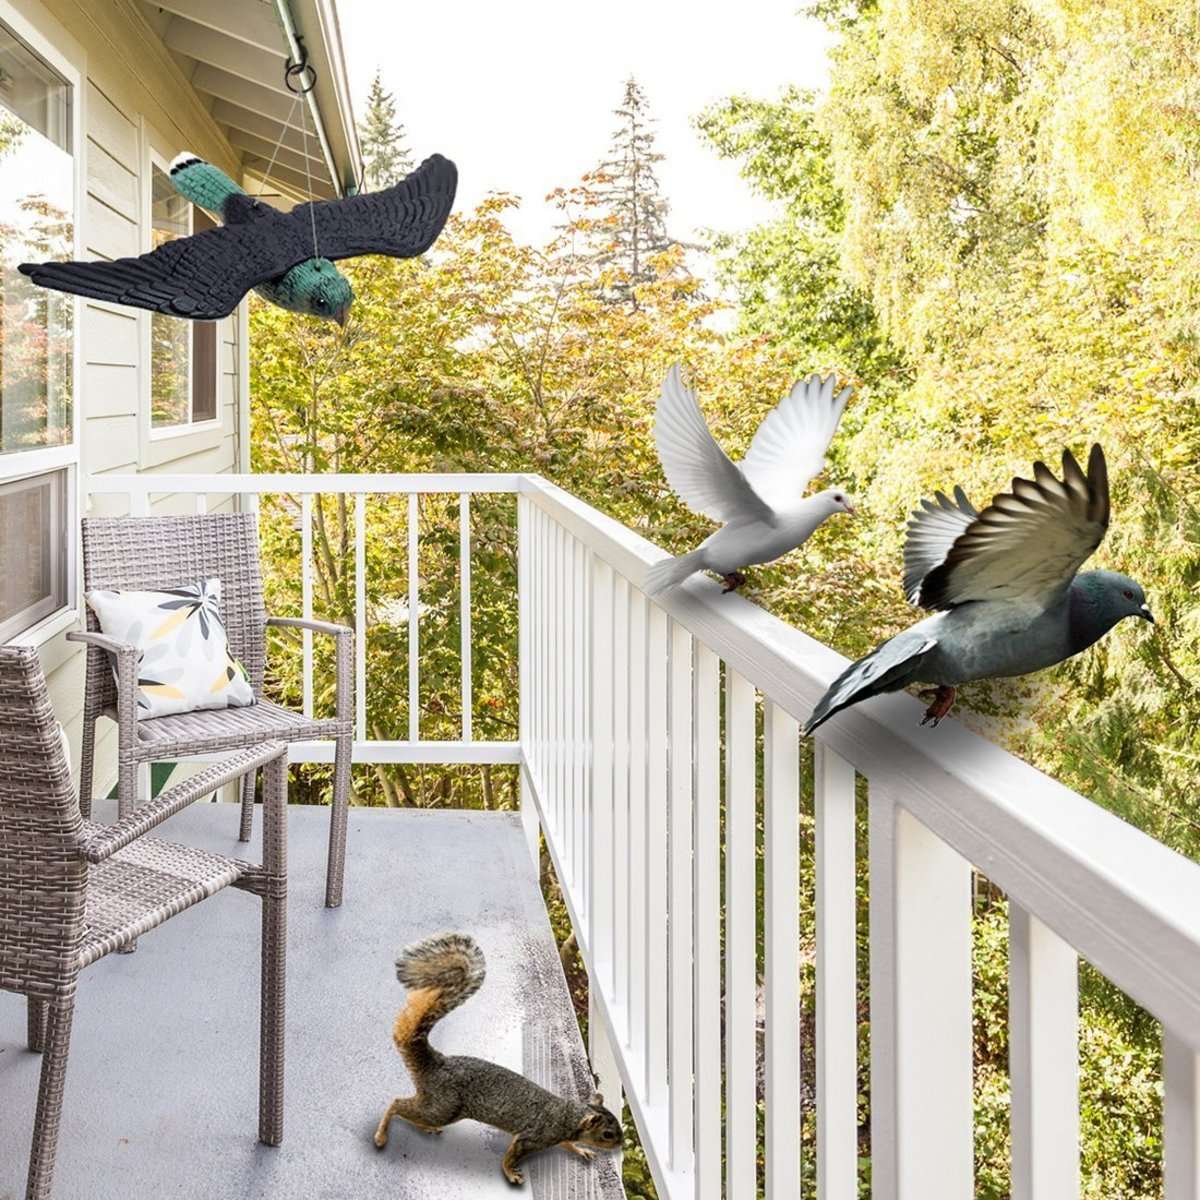 How to Keep Birds off of Patio Furniture